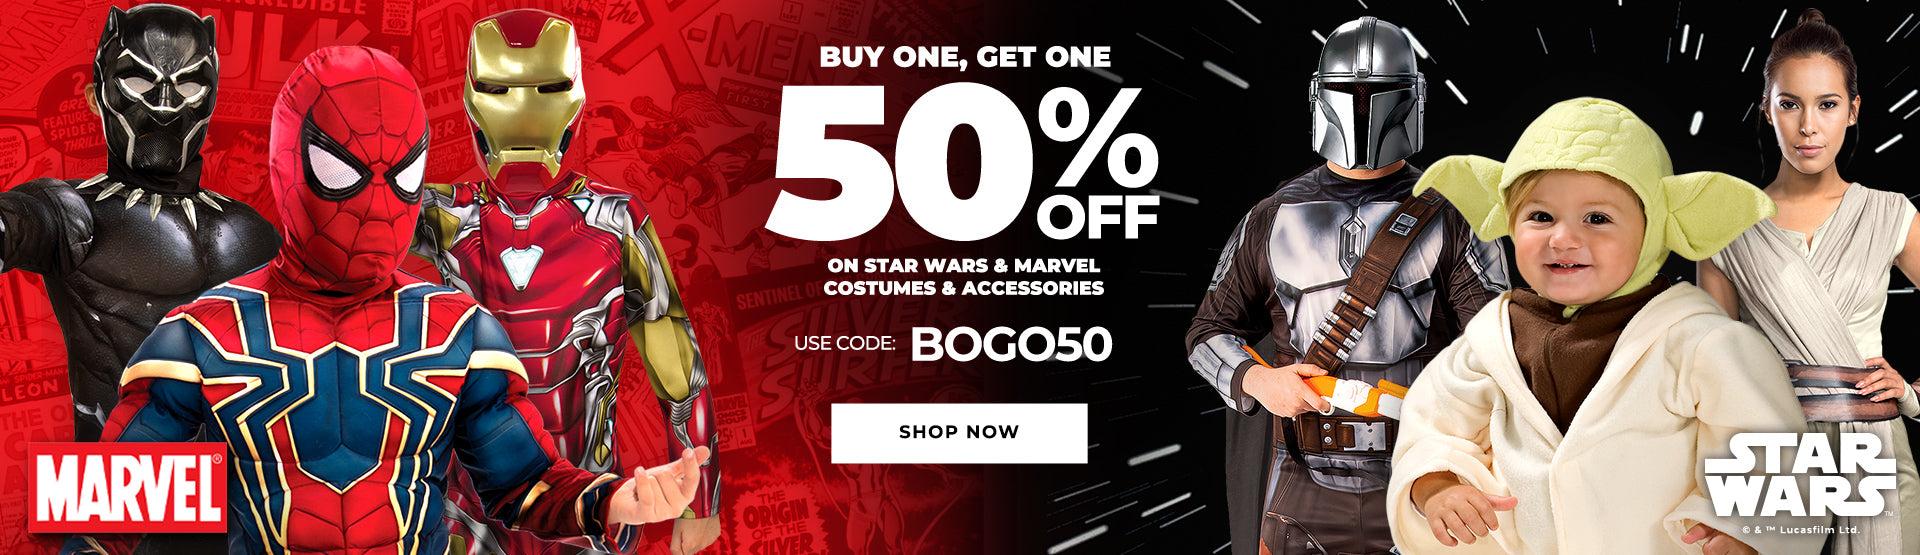 Costumes.com Buy One, Get One 50% Off on Star Wars and Marvel Costumes and Accessories